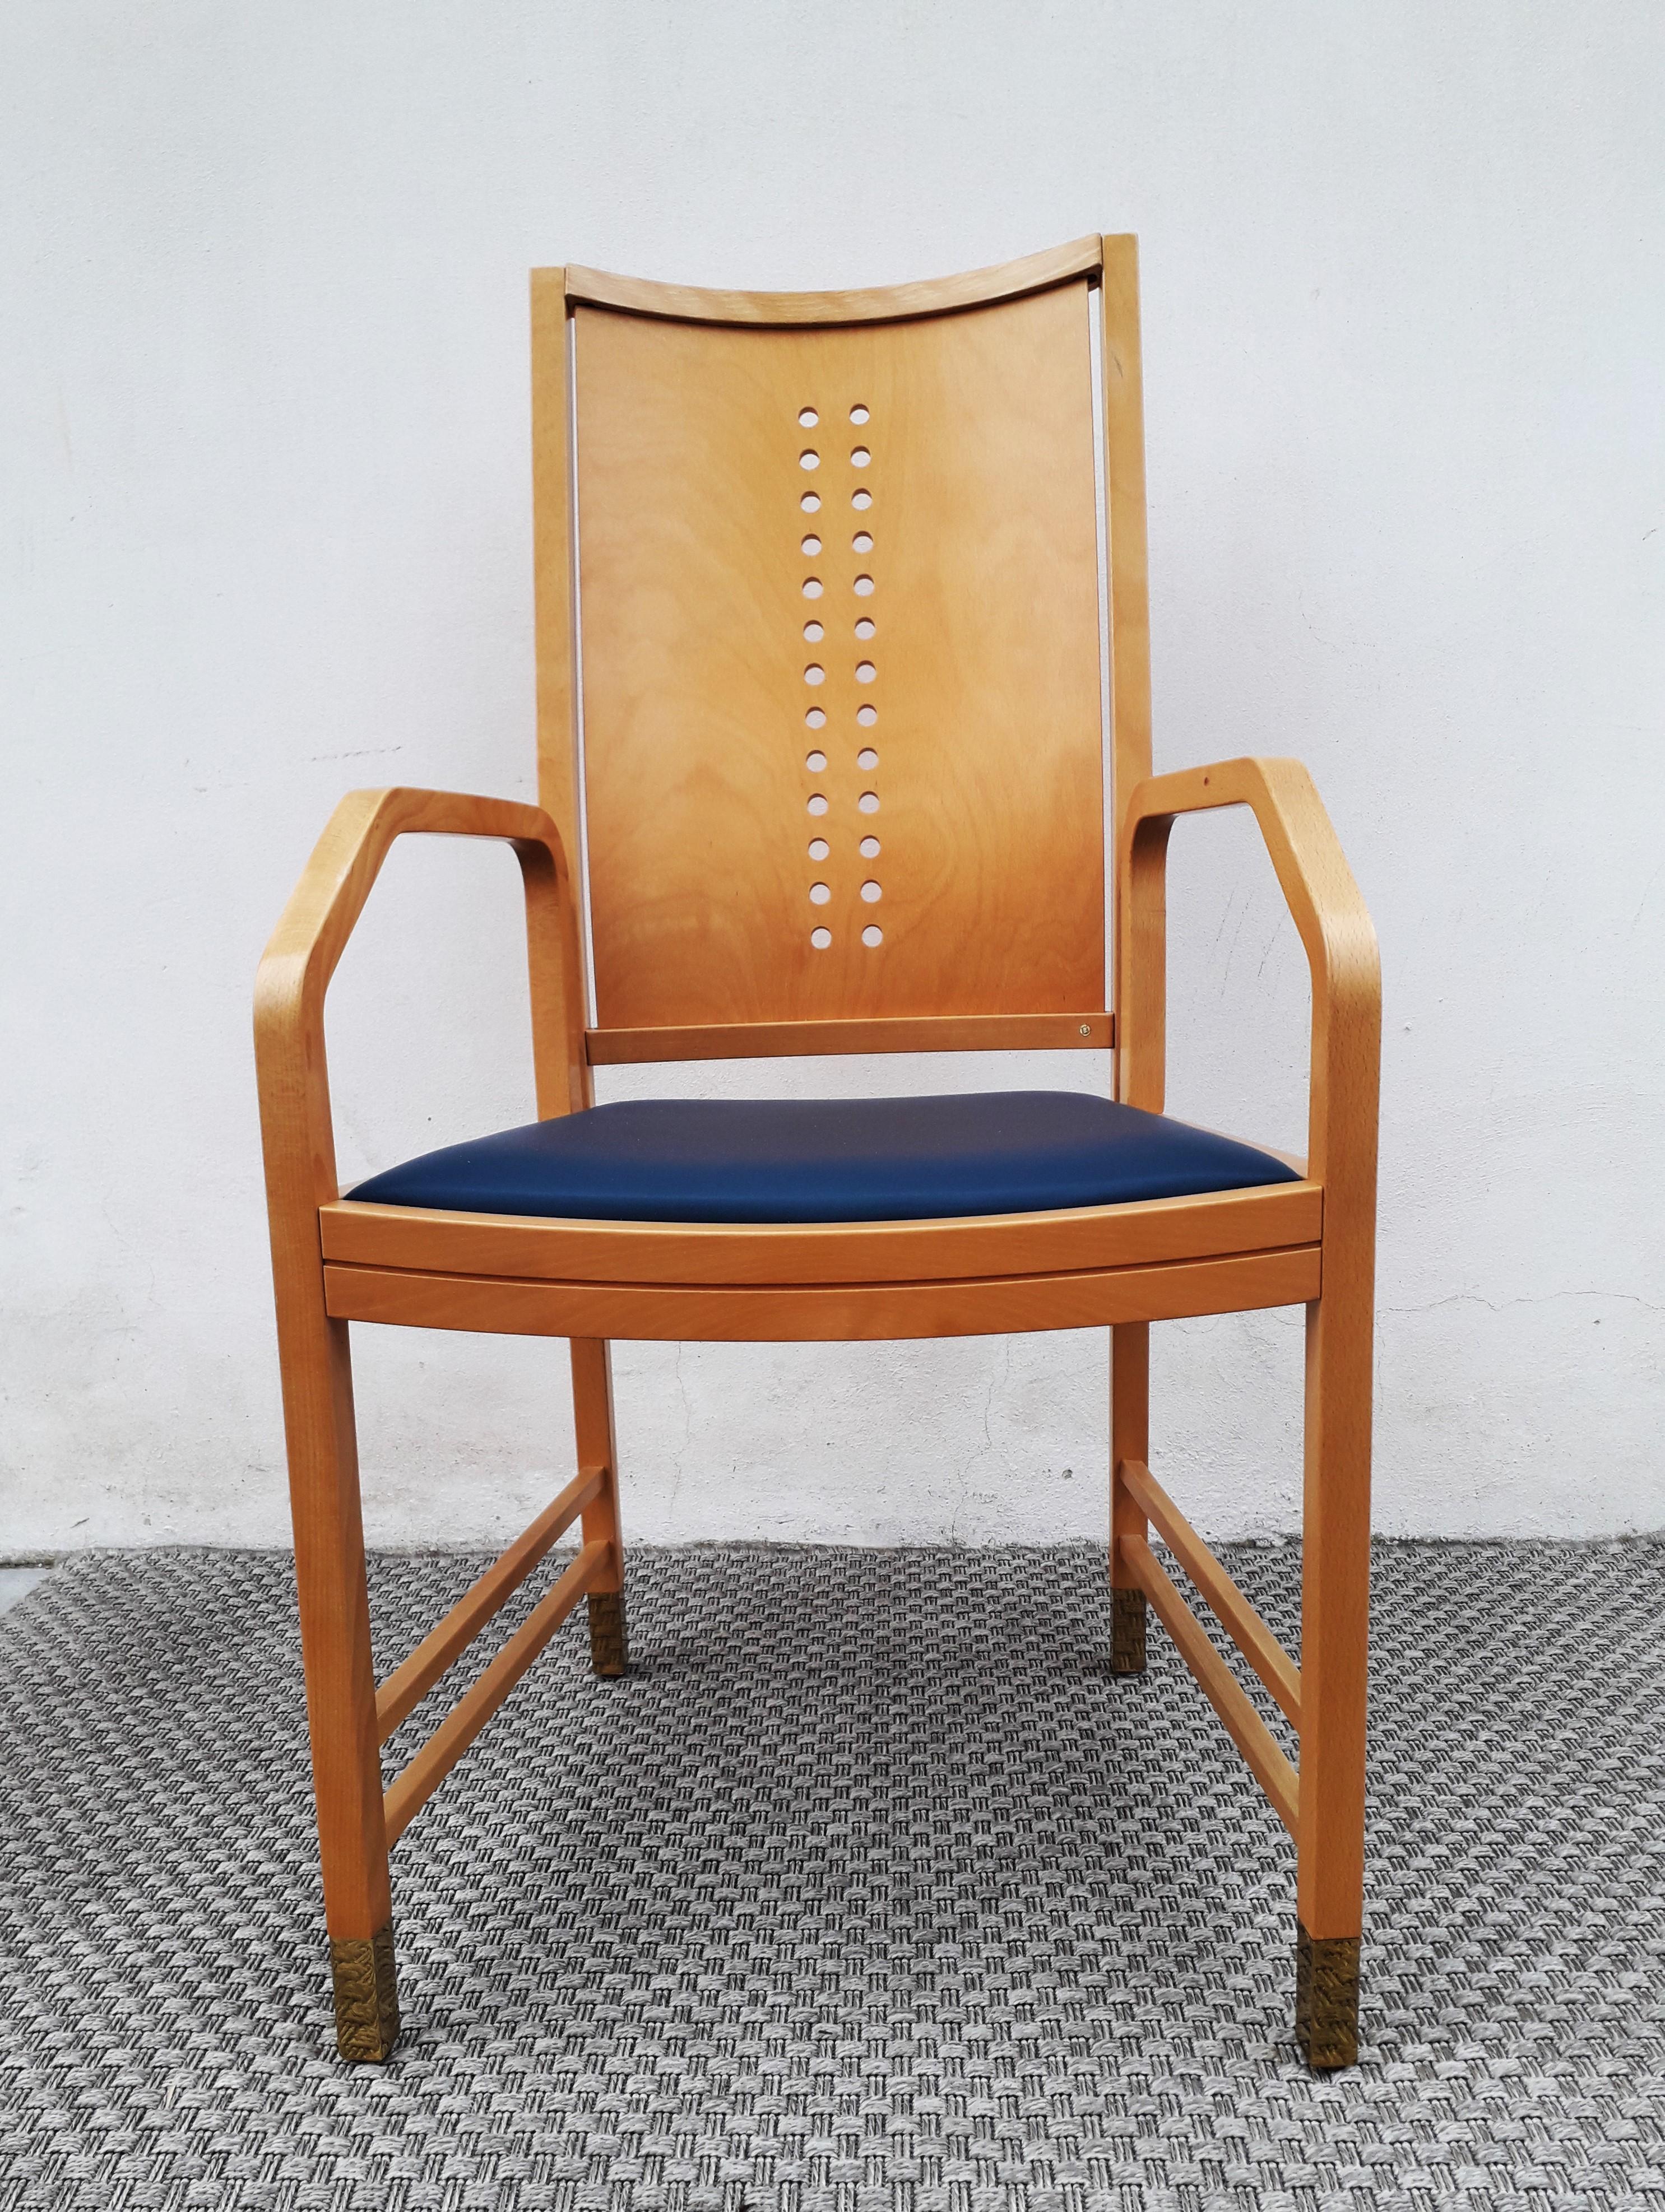 Fabulous and rare Executive chair by Thonet in Blond Beech in Koloman Moser style.
Designed by the famous Viennese architect Ernst W. Beranek also known as a well-known teacher of Industrial Design.
The armchair is characterized by a rectangular